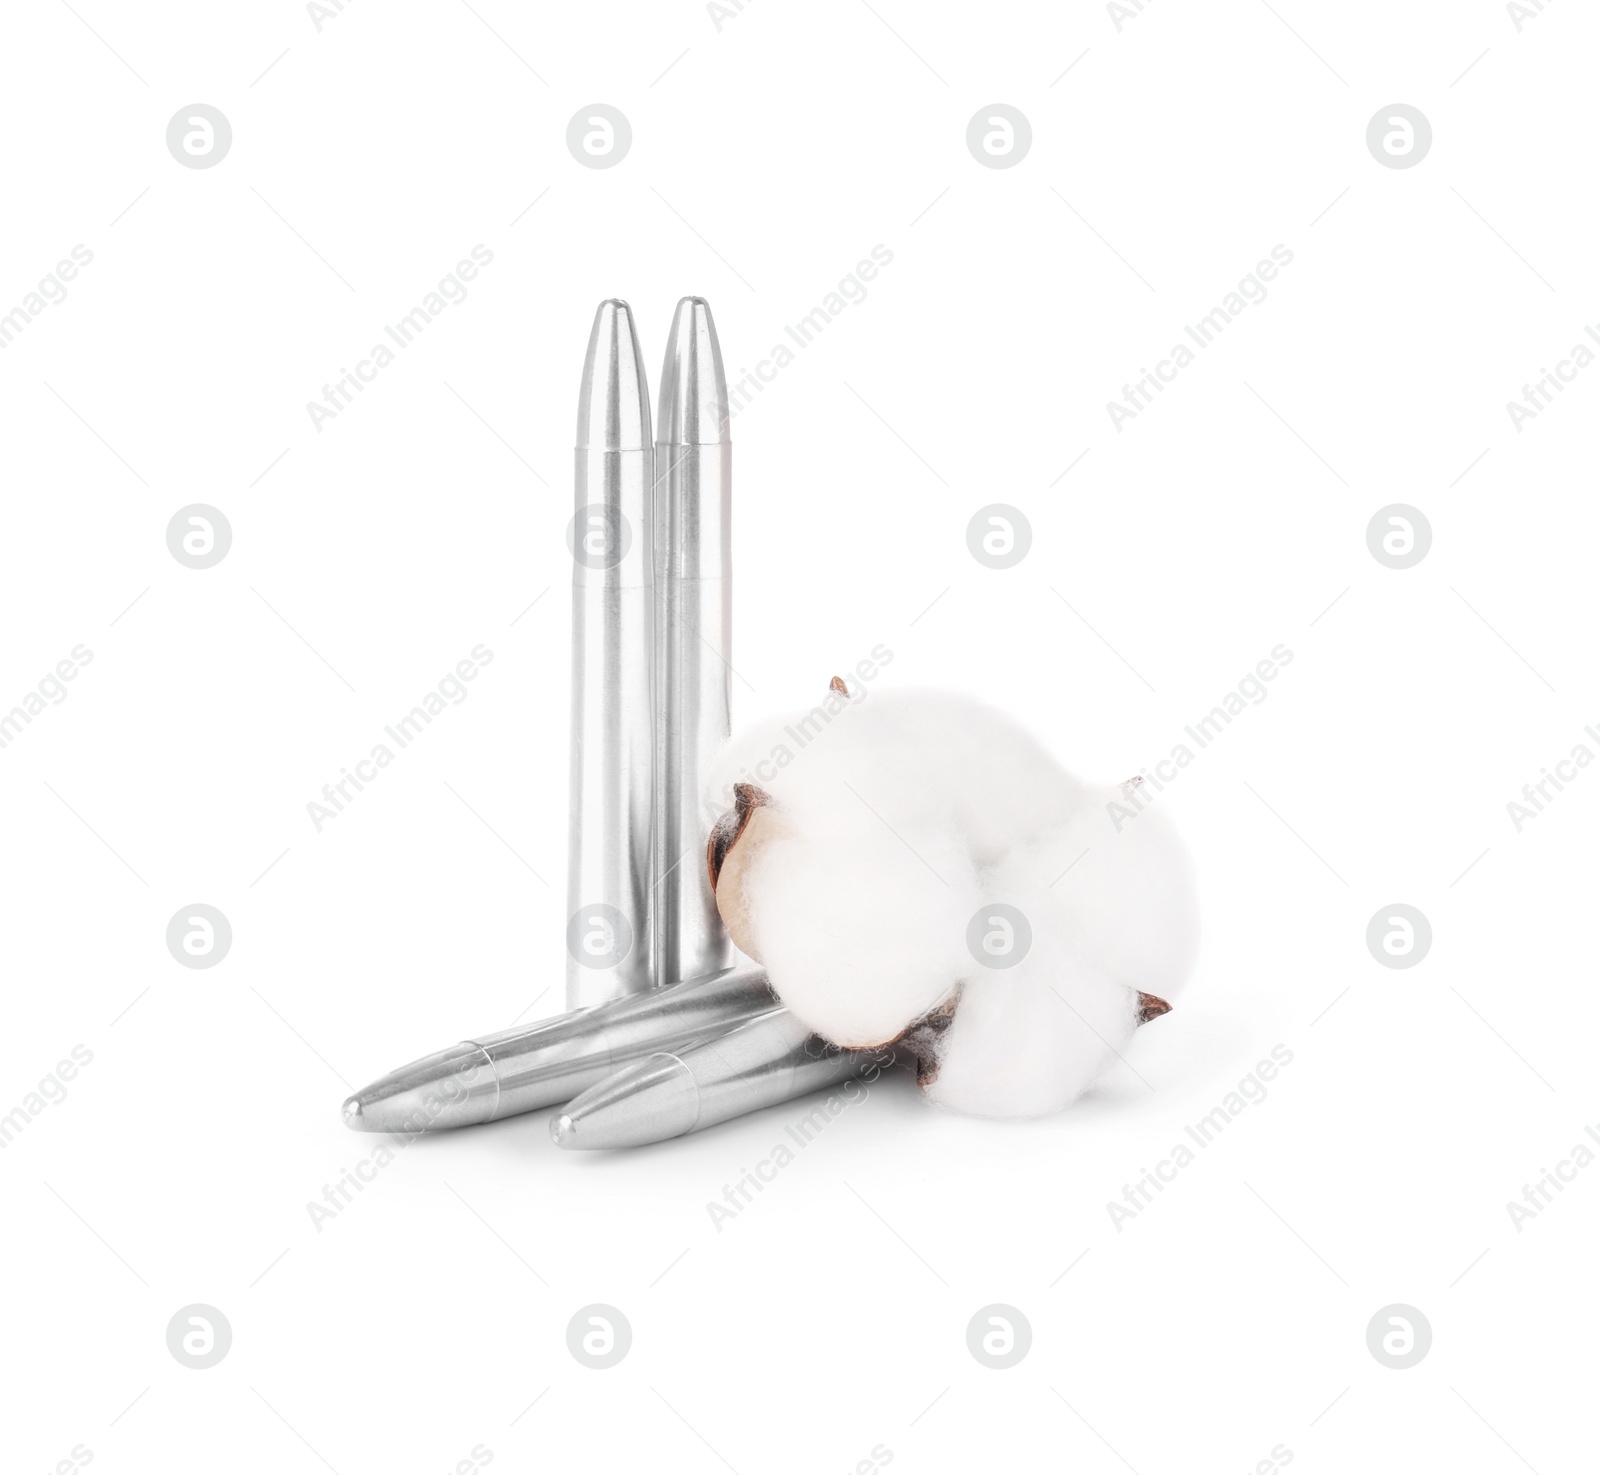 Photo of Bullets and beautiful cotton flower isolated on white